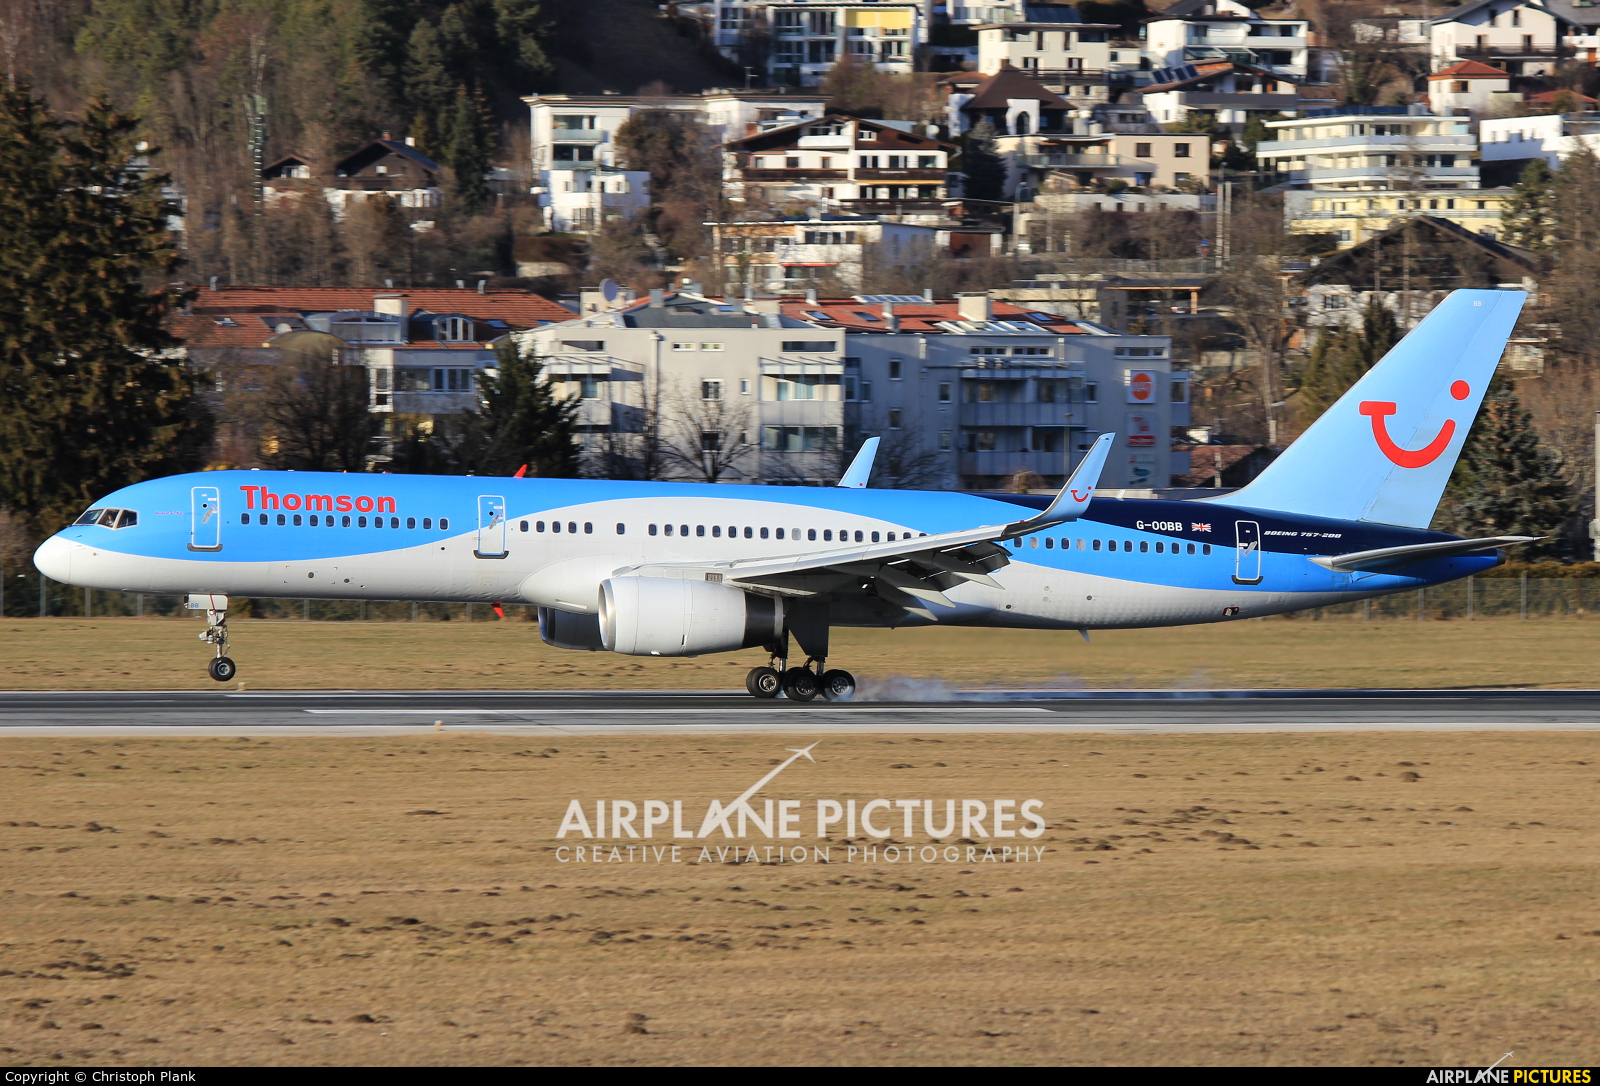 Thomson/Thomsonfly G-OOBB aircraft at Innsbruck